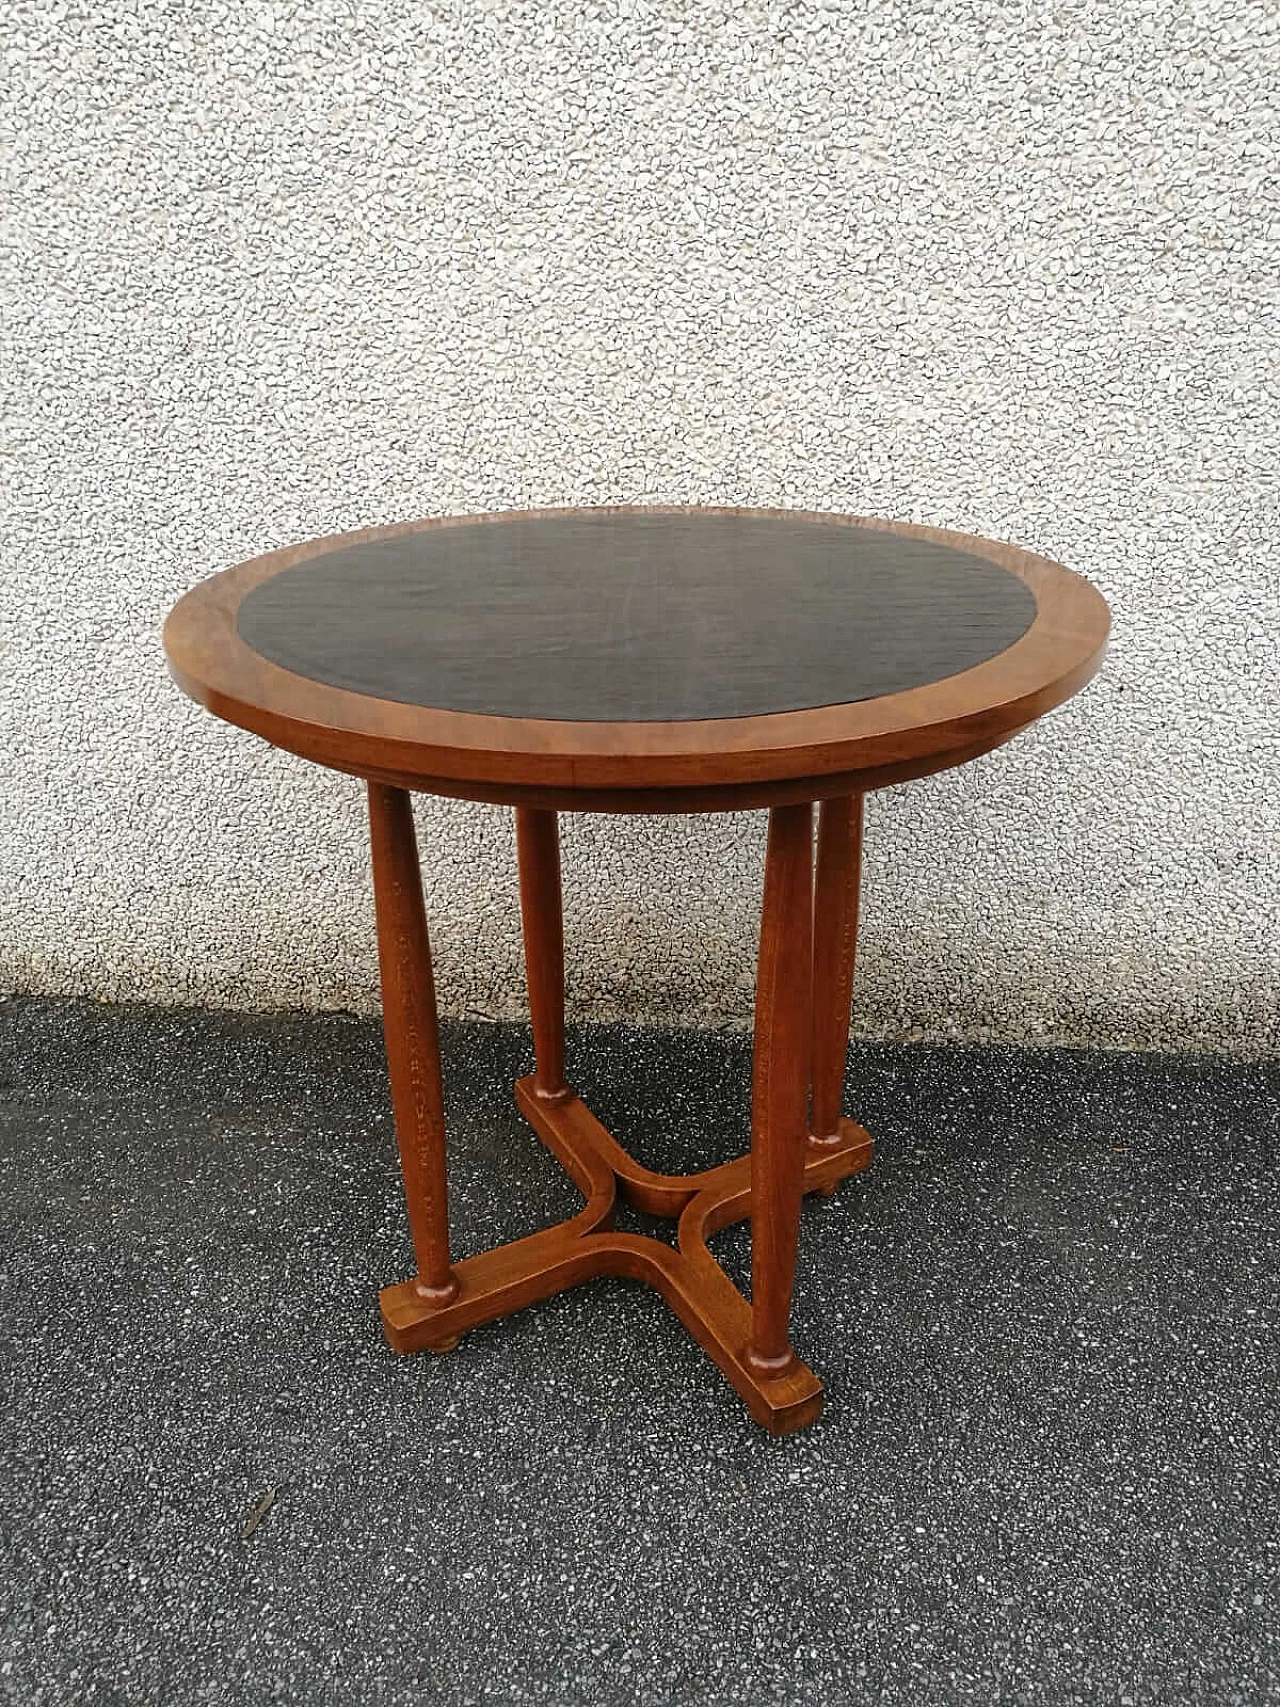 Coffee table in beech wood and top in Thonet leather, end of 19th century 1162647